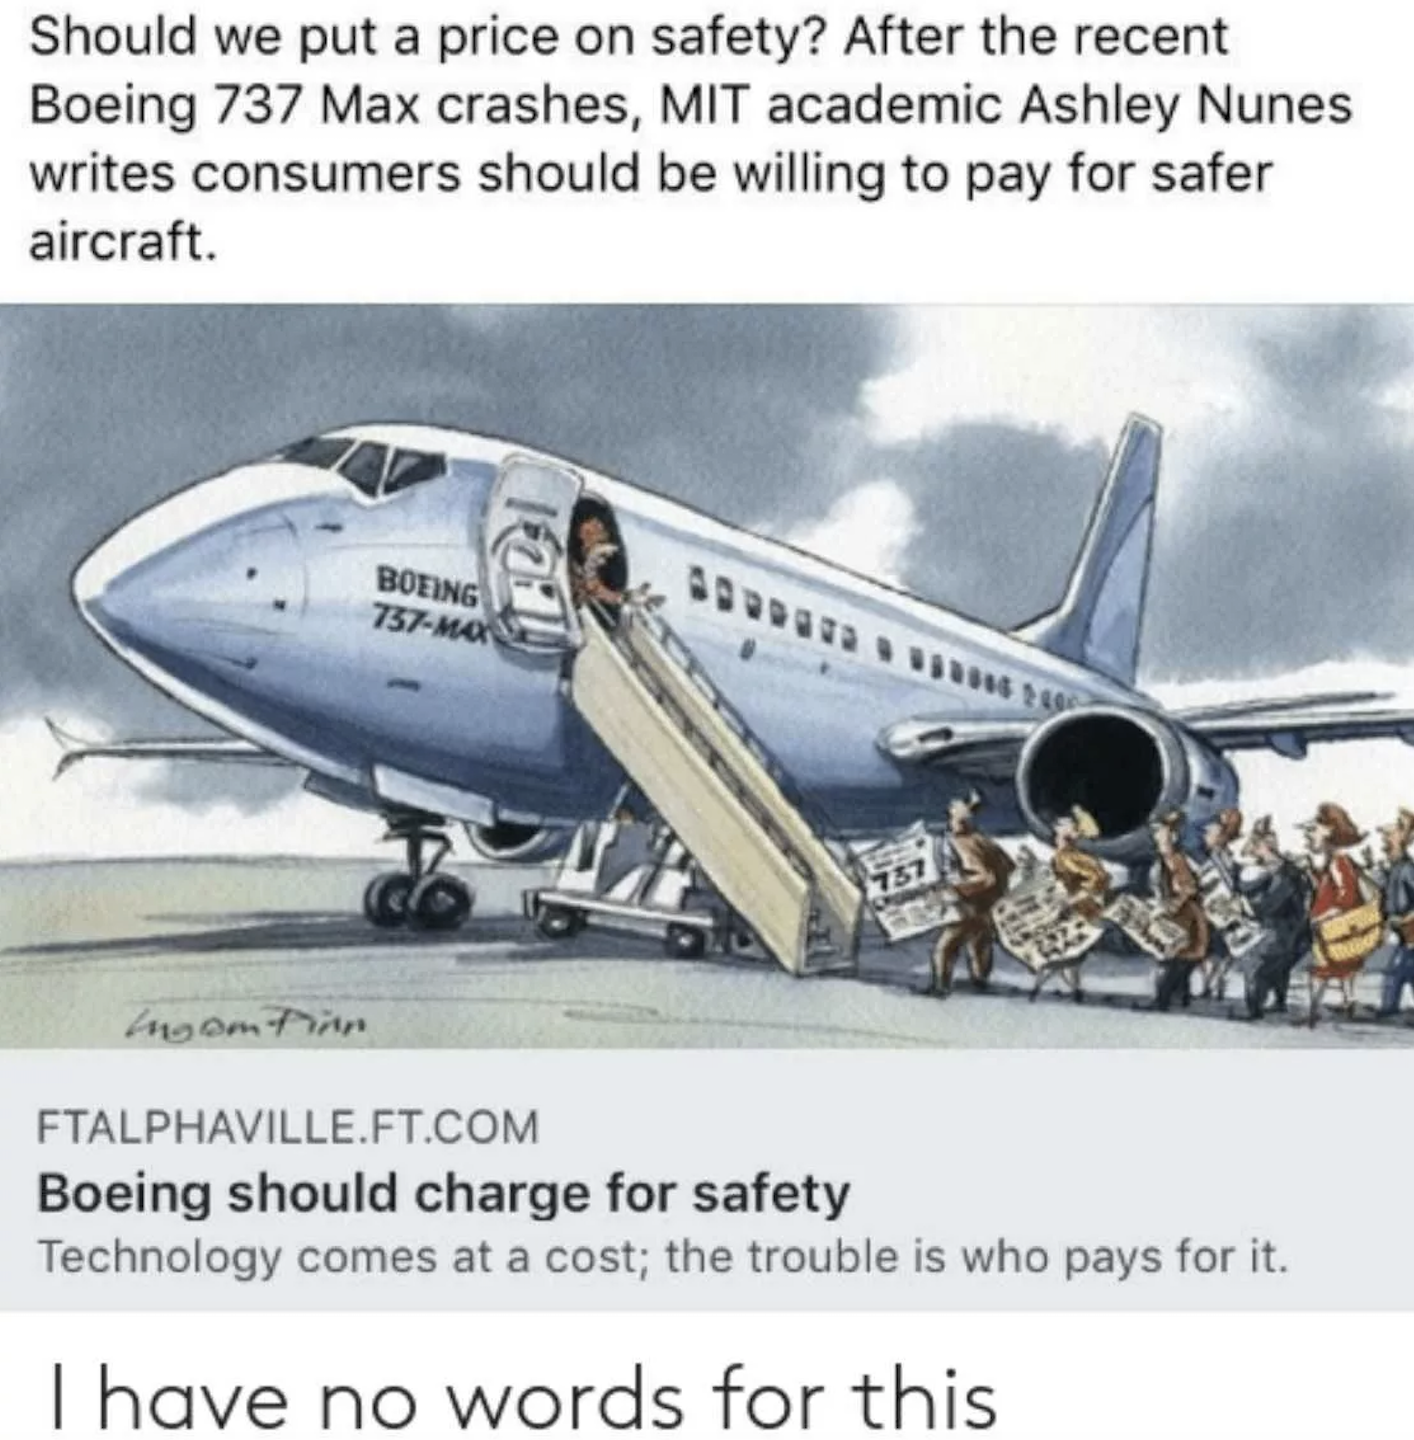 b737 max accidents - Should we put a price on safety? After the recent Boeing 737 Max crashes, Mit academic Ashley Nunes writes consumers should be willing to pay for safer aircraft. Boeing 757Max Corren Im Yo Ayomfan Ftalphaville.Ft.Com Boeing should cha